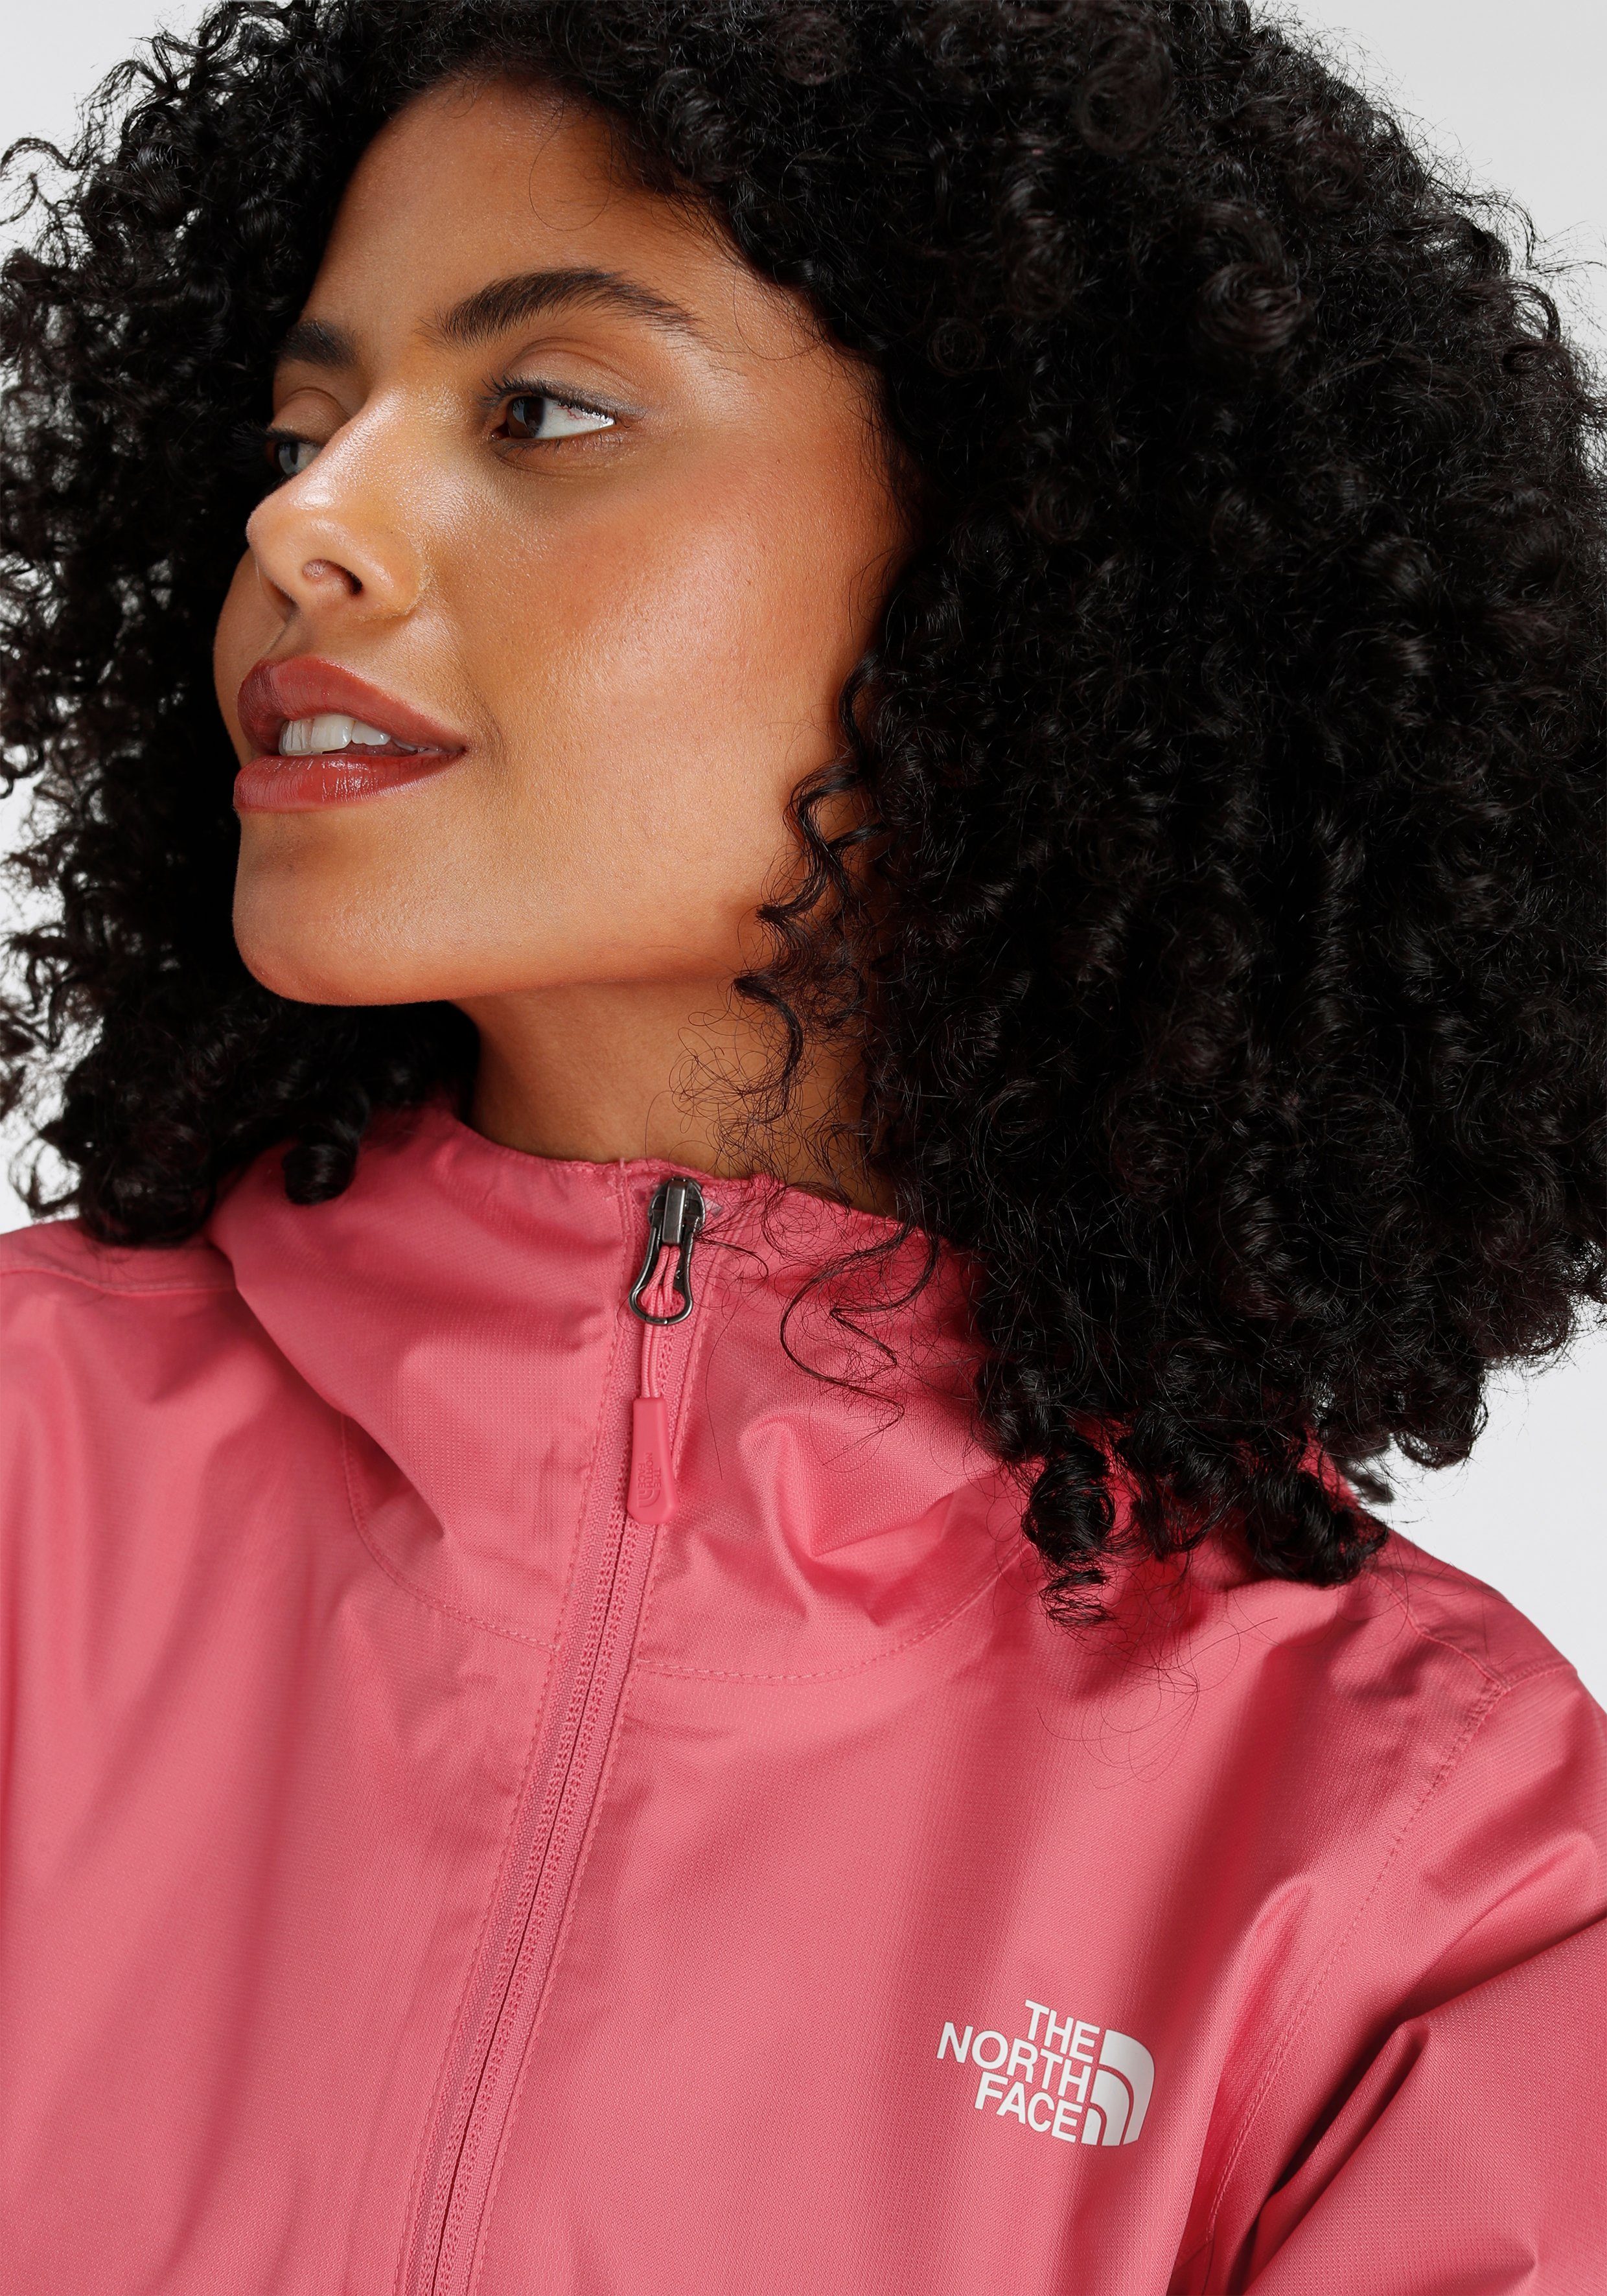 The North Face Funktionsjacke W QUEST cosmo - JACKET Logostickerei pink mit EU (1-St)